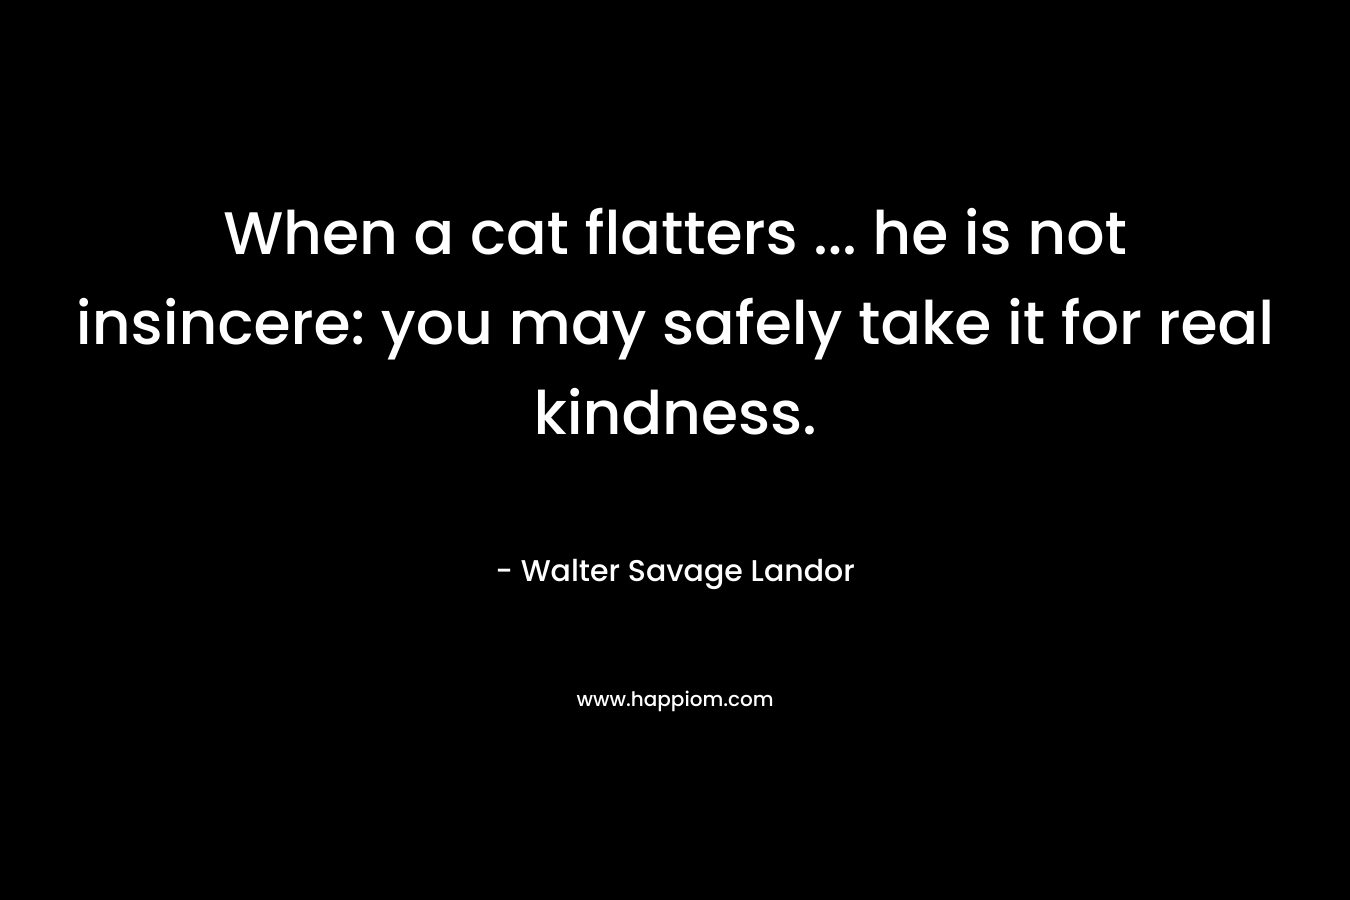 When a cat flatters … he is not insincere: you may safely take it for real kindness. – Walter Savage Landor